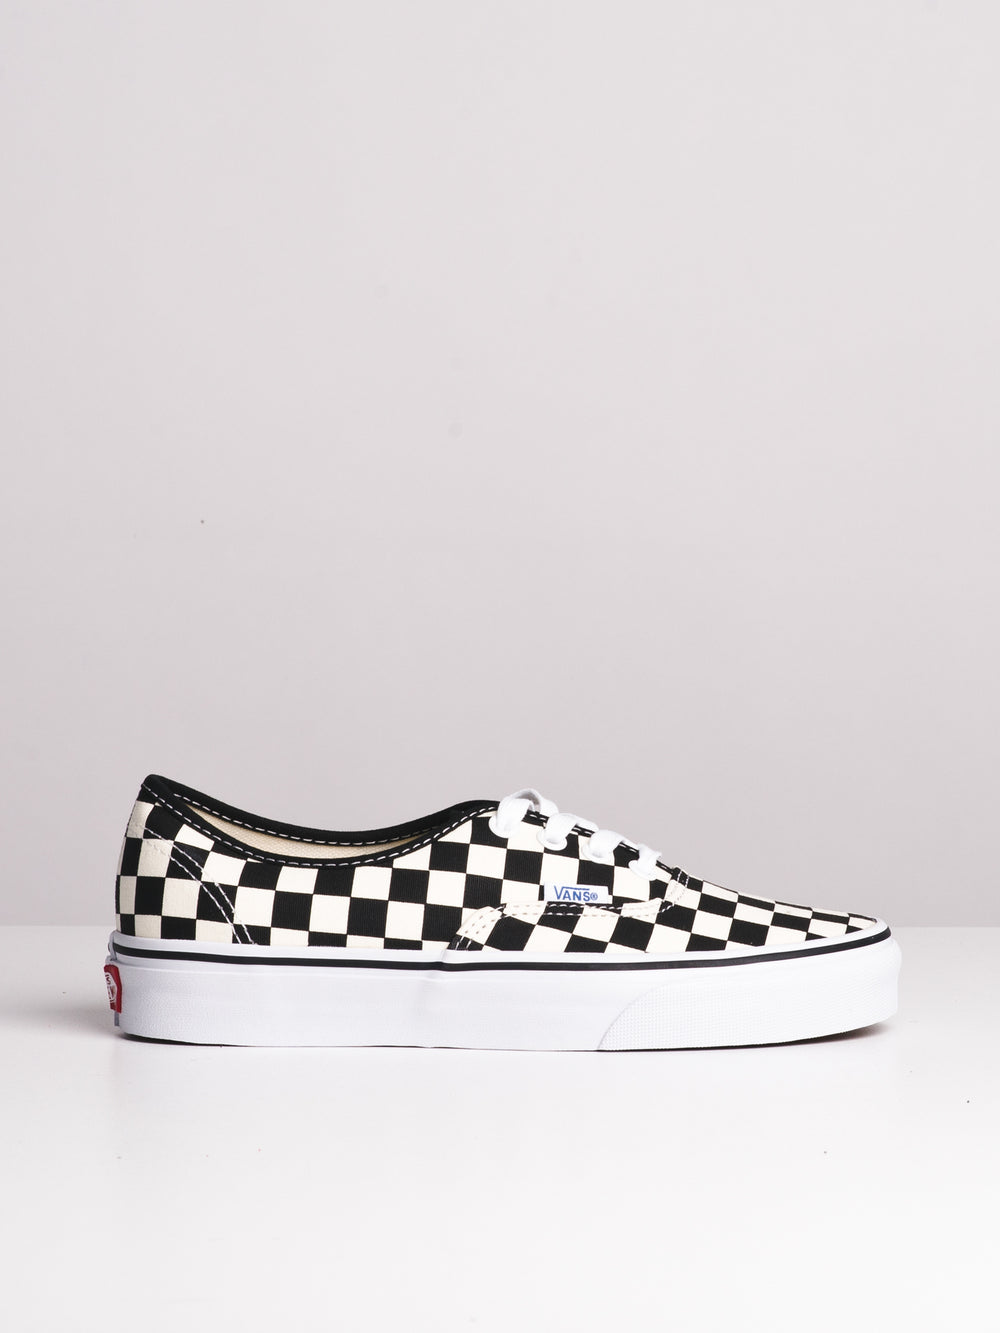 WOMENS VANS AUTHENTIC SNEAKERS - CLEARANCE